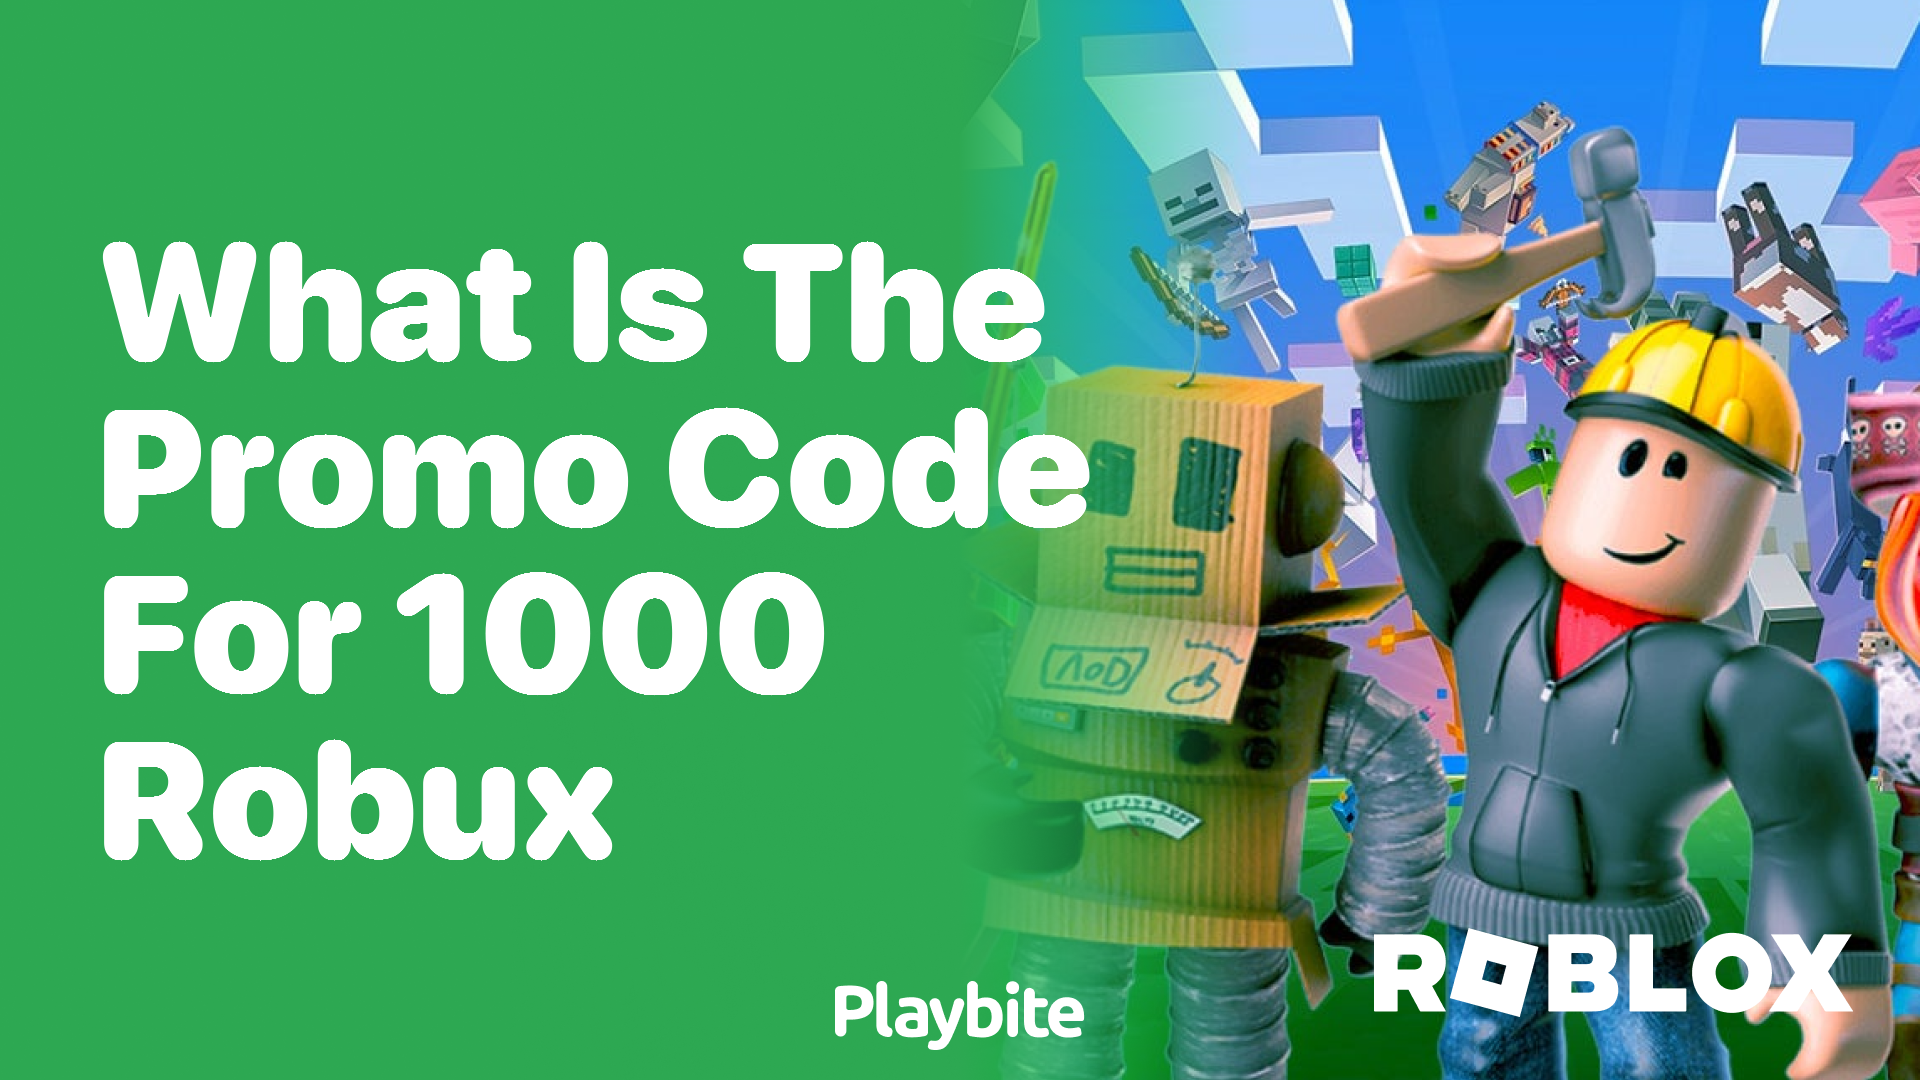 What is the Promo Code for 1000 Robux? - Playbite